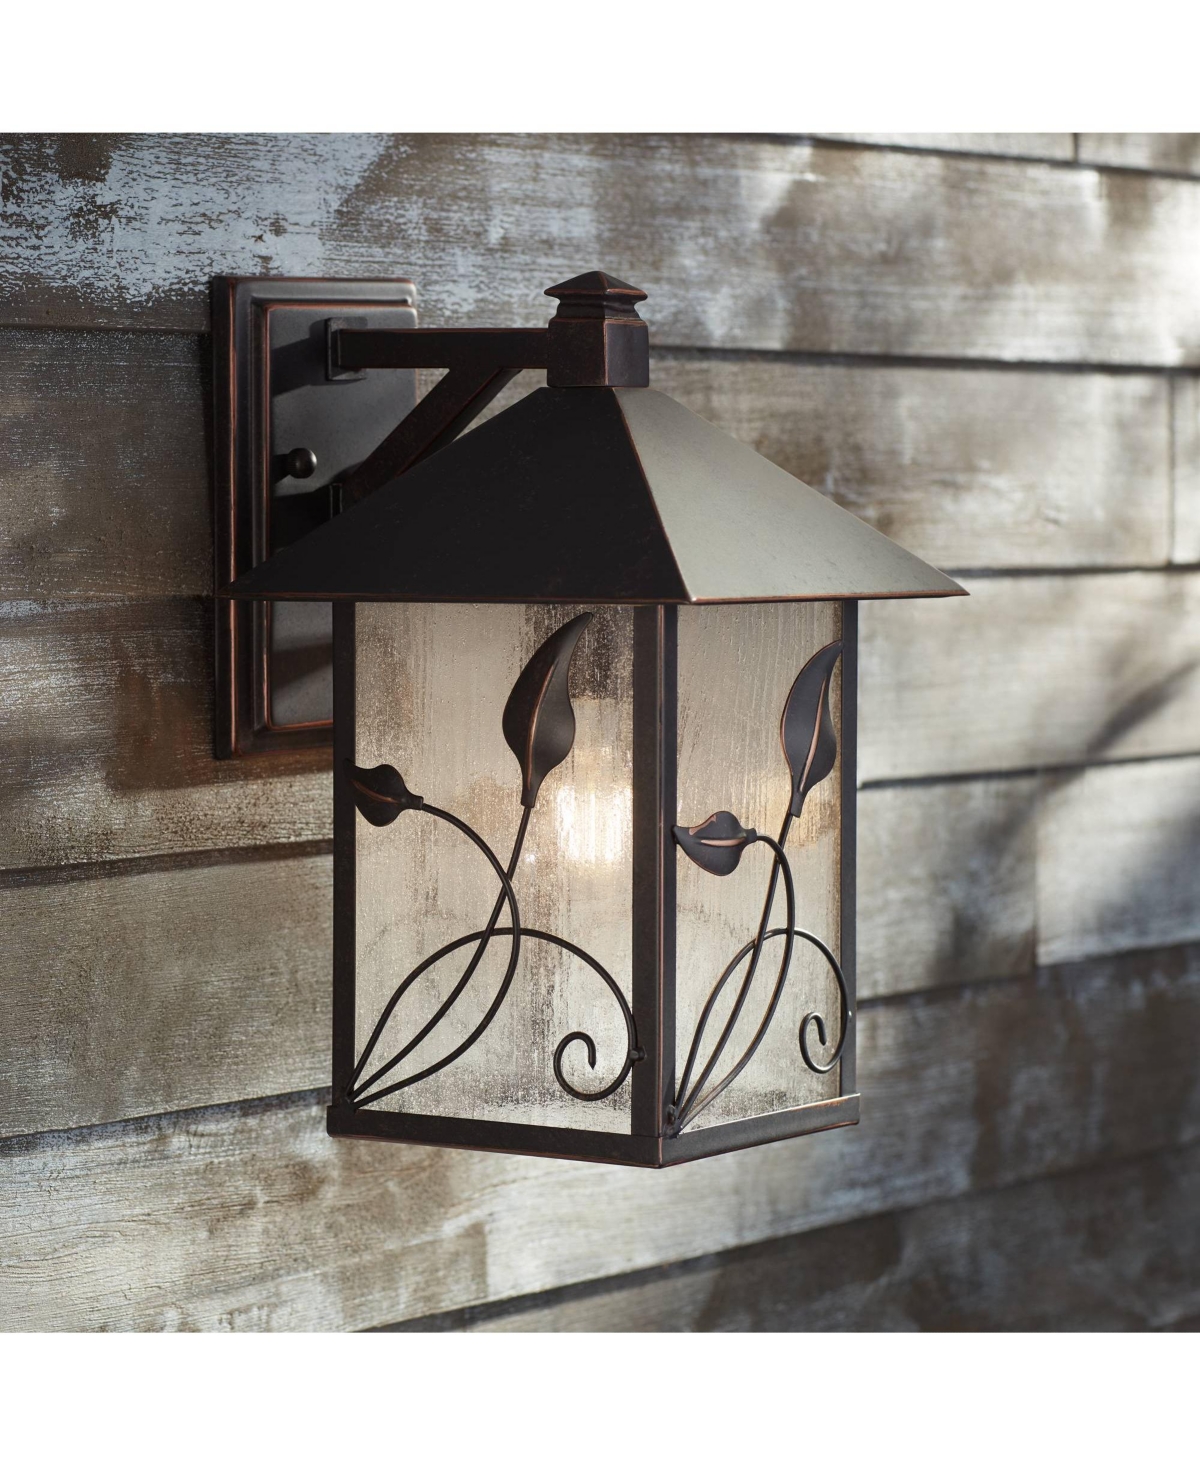 French Garden Rustic Country Cottage Outdoor Wall Light Bronze Brown Hardwired 8 1/2" Wide Fixture Clear Seedy Glass Shade for Bedroom Bathroom Bedsid